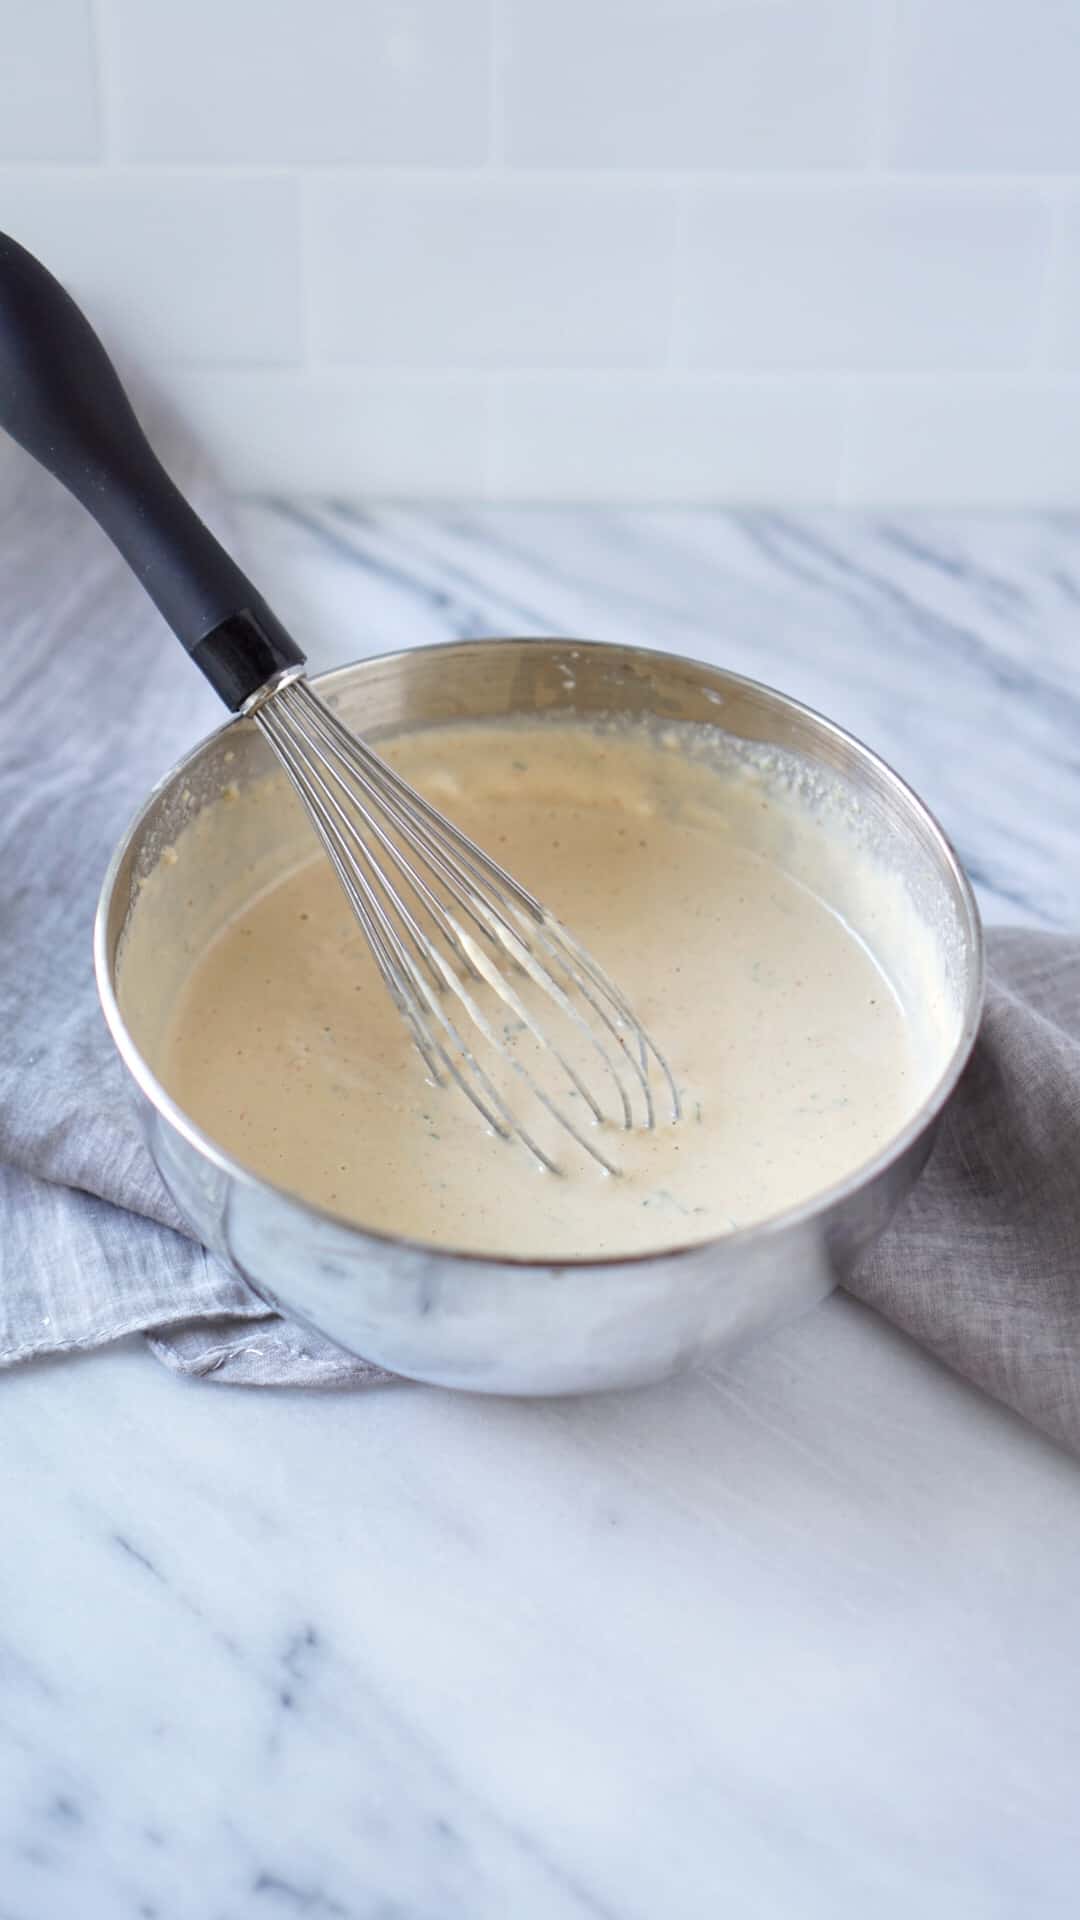 Whisk in a metal mixing bowl with tahini sauce